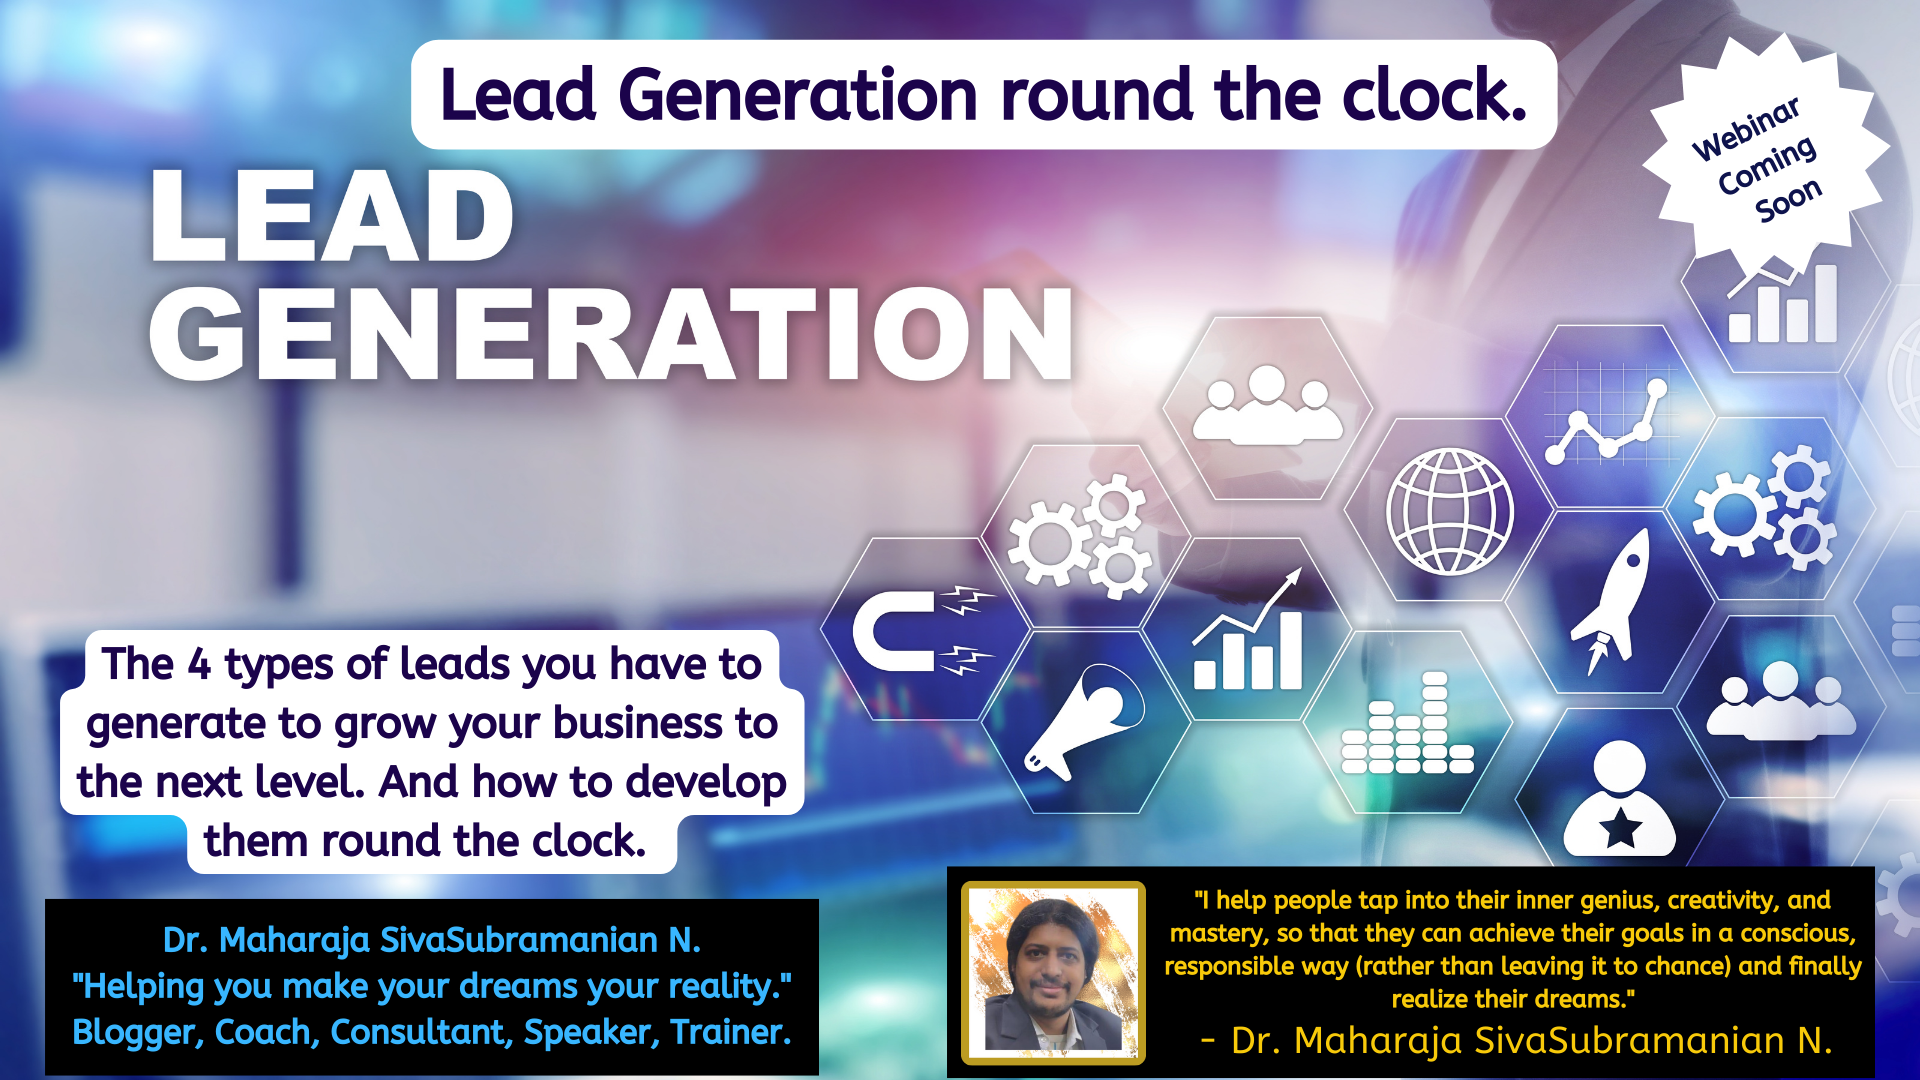 Lead Generation round the clock for solopreneurs. – Upcoming free webinar.